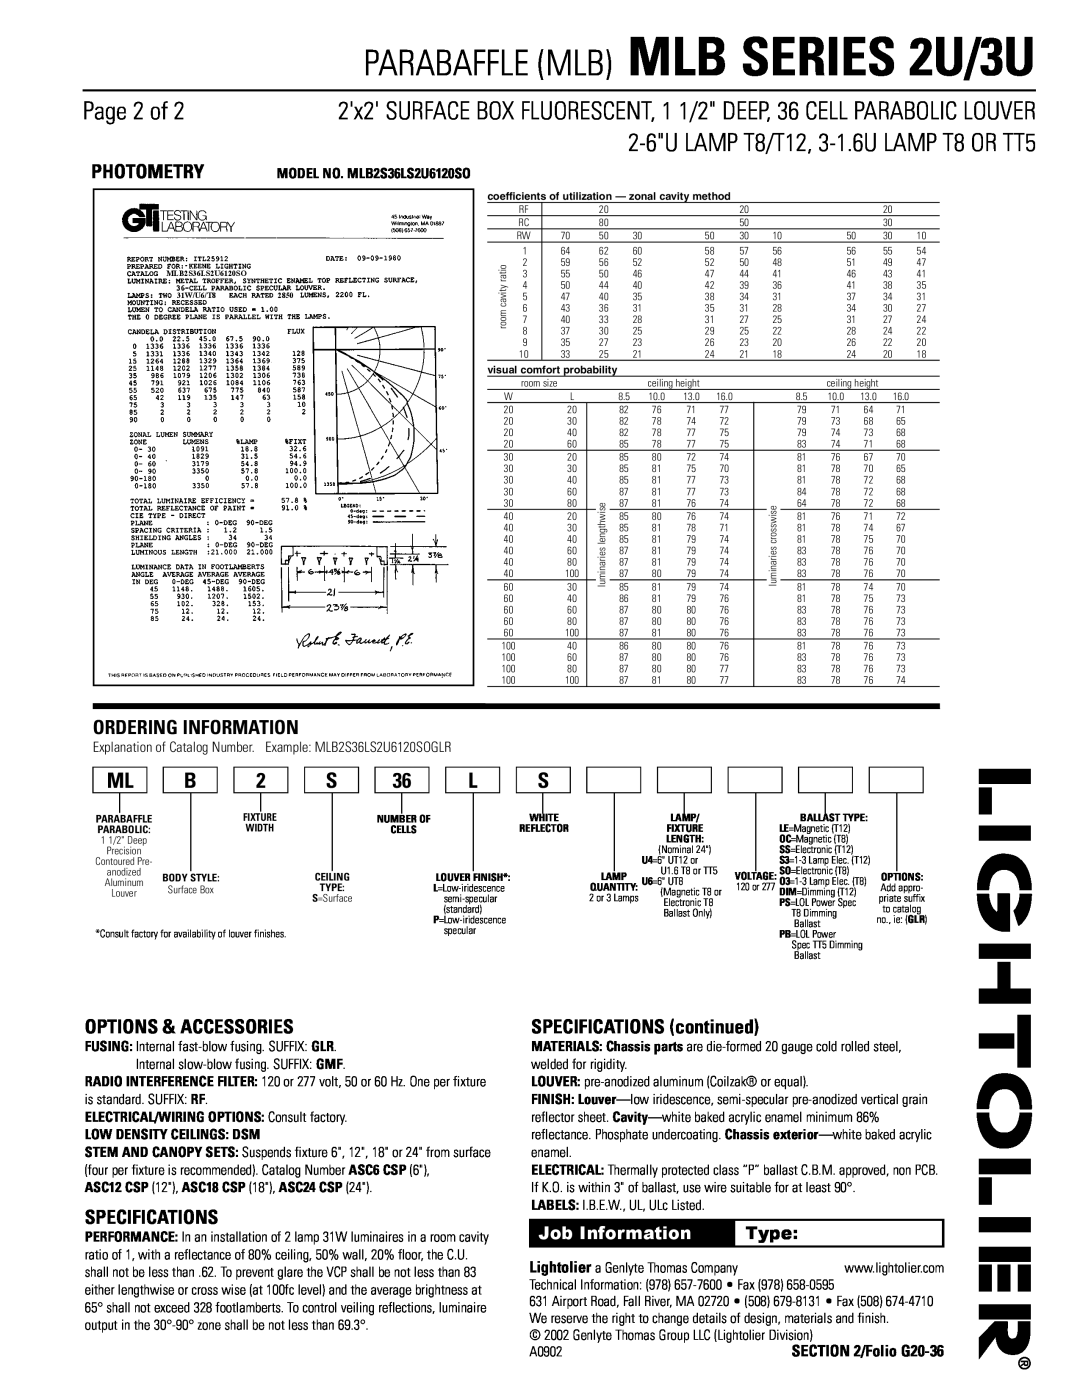 Lightolier MLB SERIES Page 2 of, Photometry, Ordering Information, Options & Accessories, Specifications, Job Information 